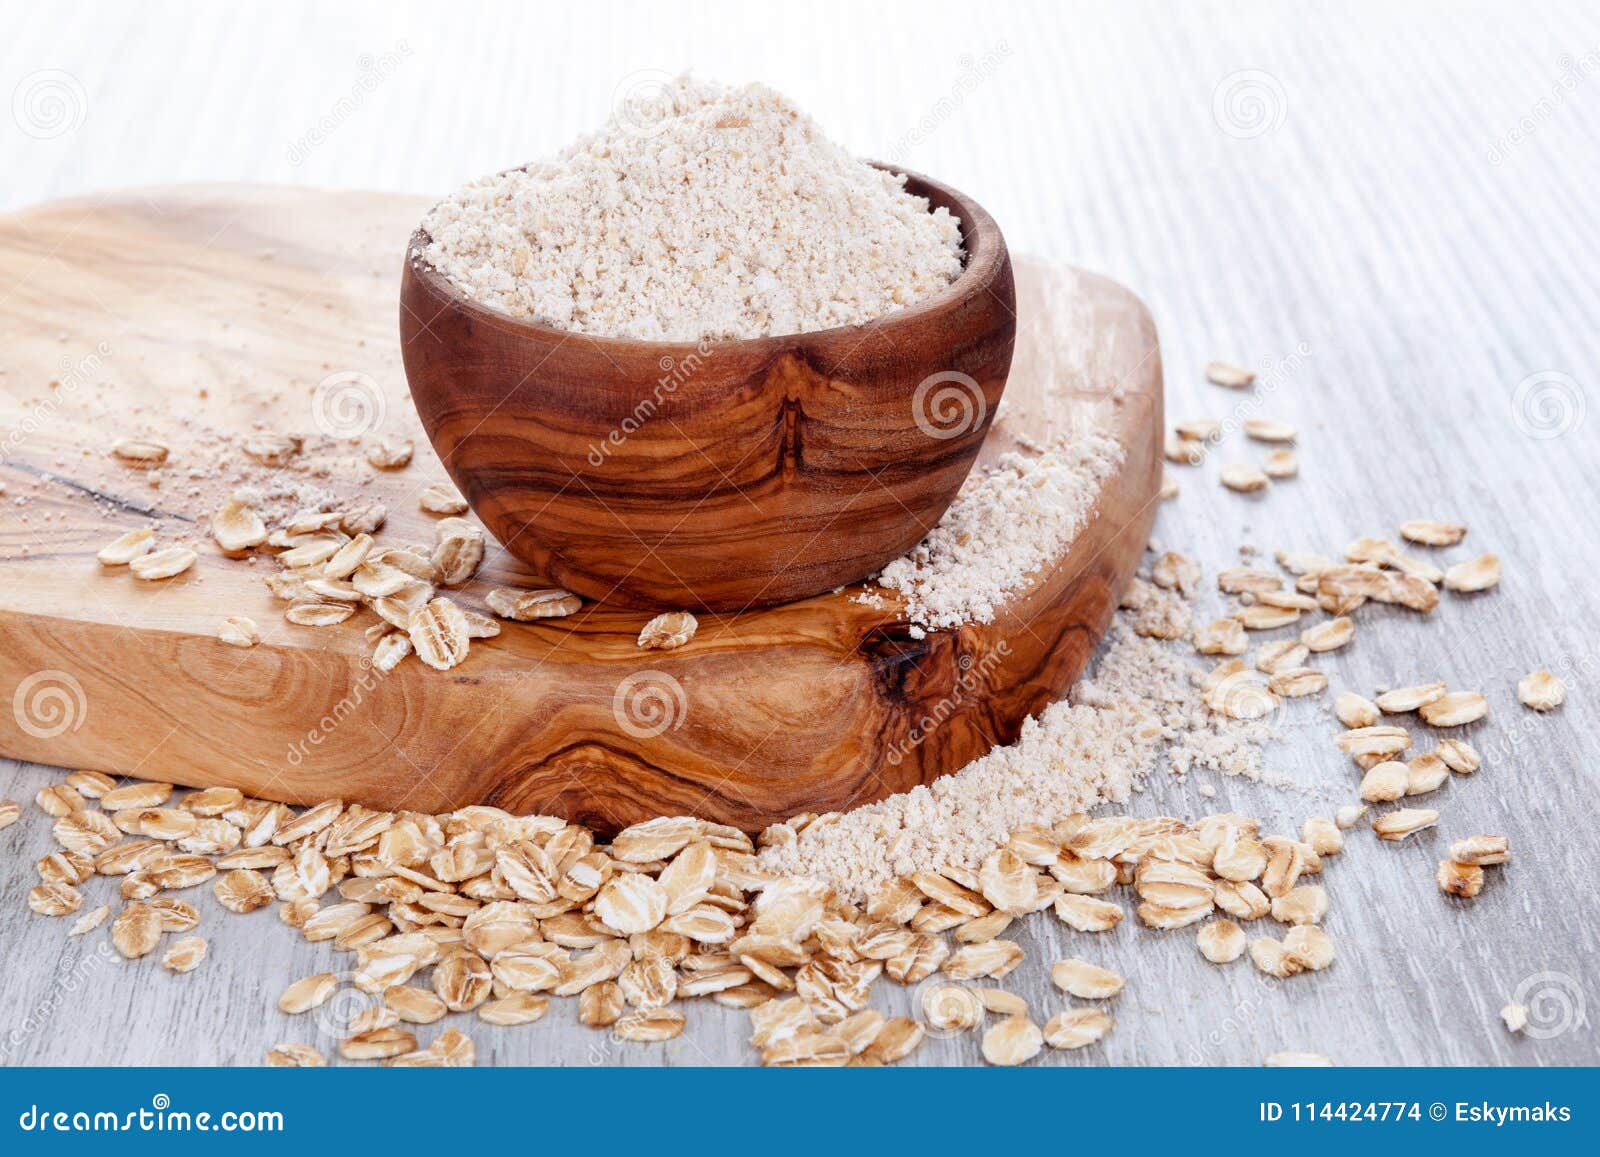 Oat flour in wooden bowl. stock photo. Image of pile - 114424774